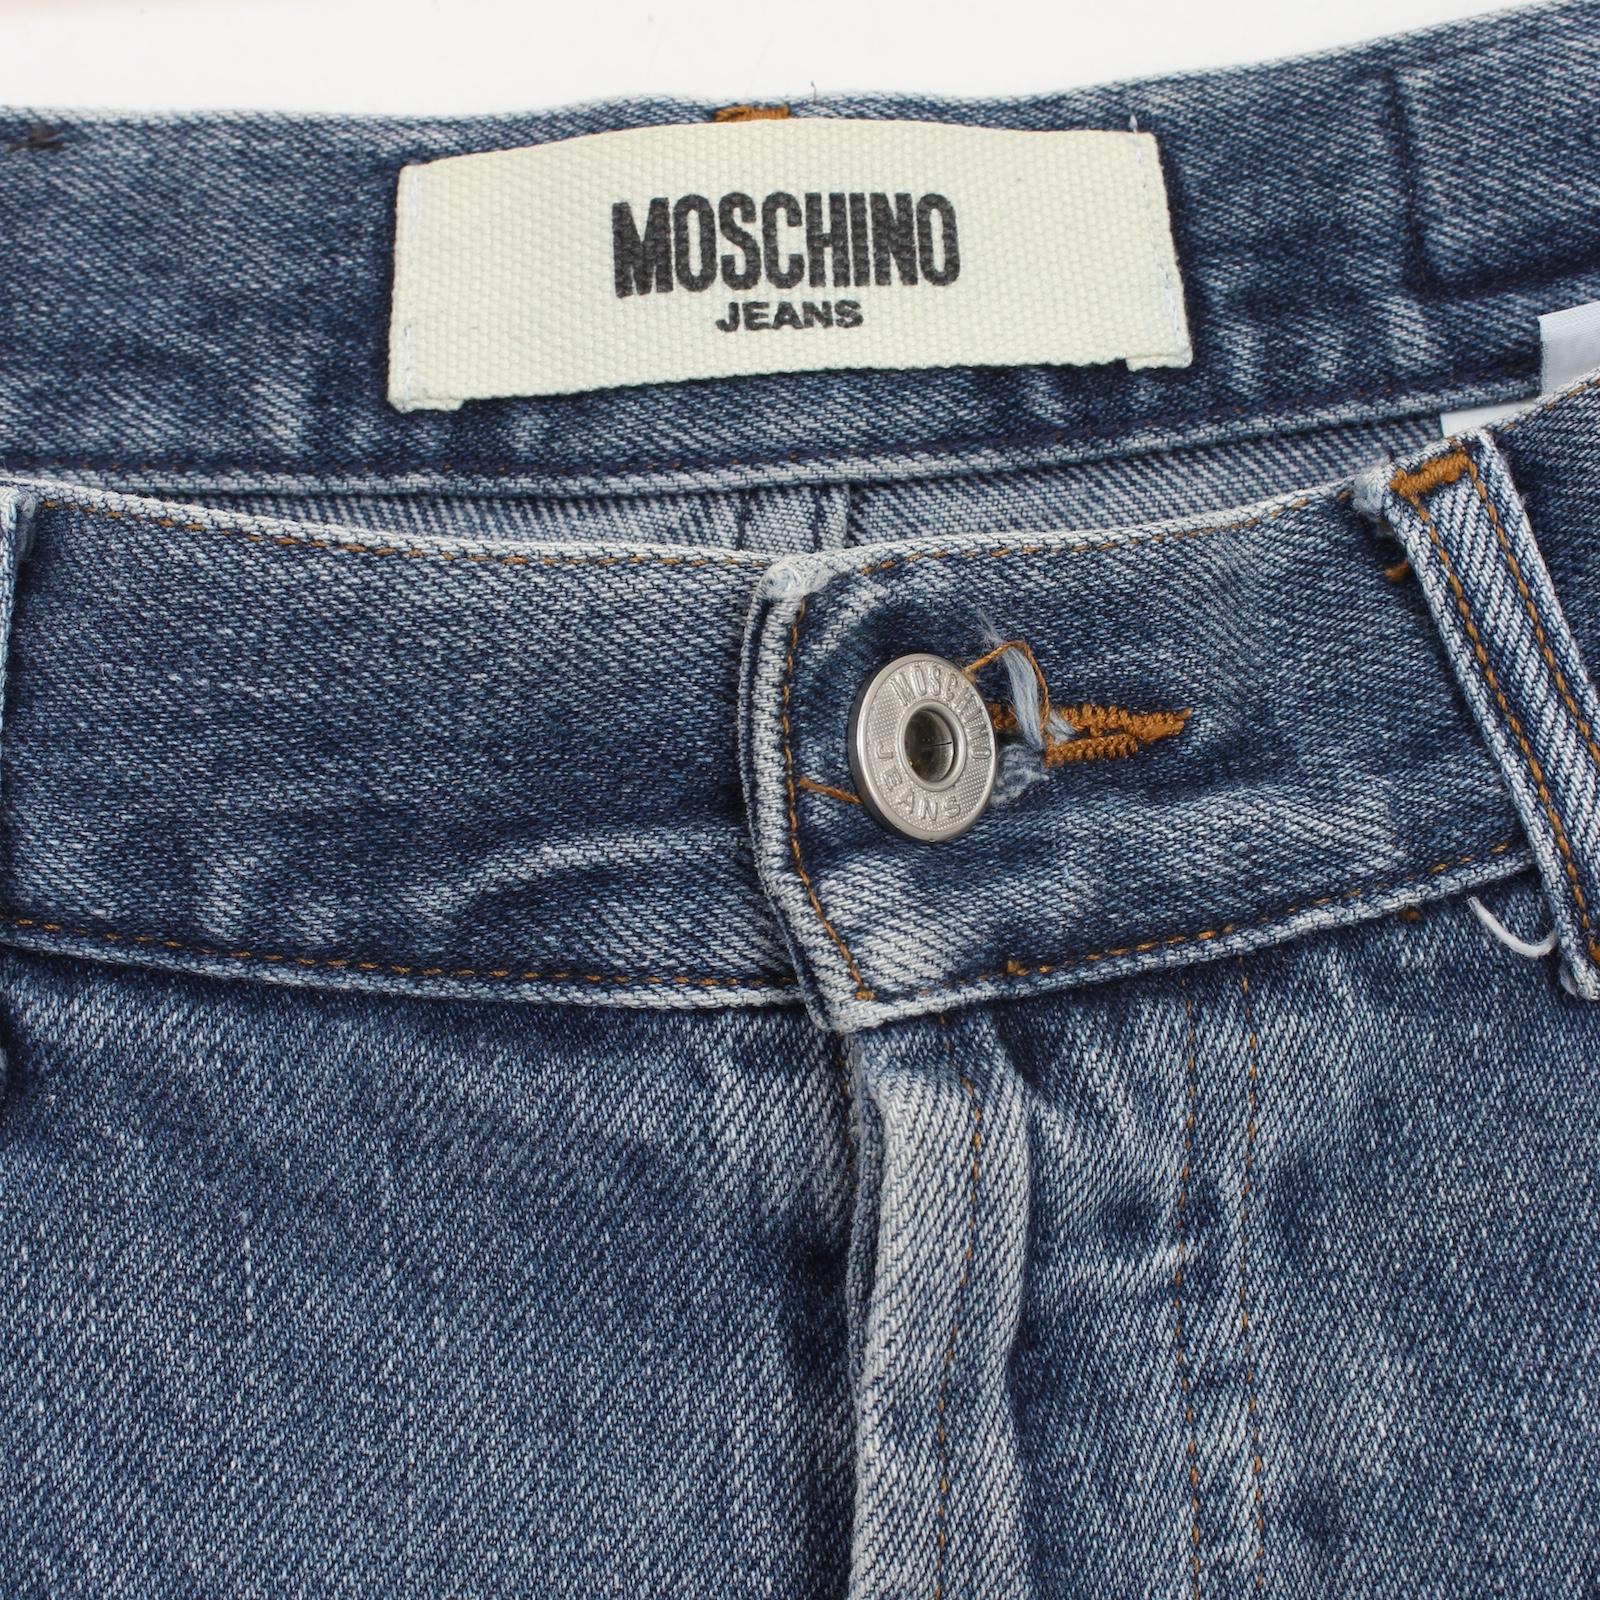 Moschino Patchwork Blue Jeans 2000s For Sale 5